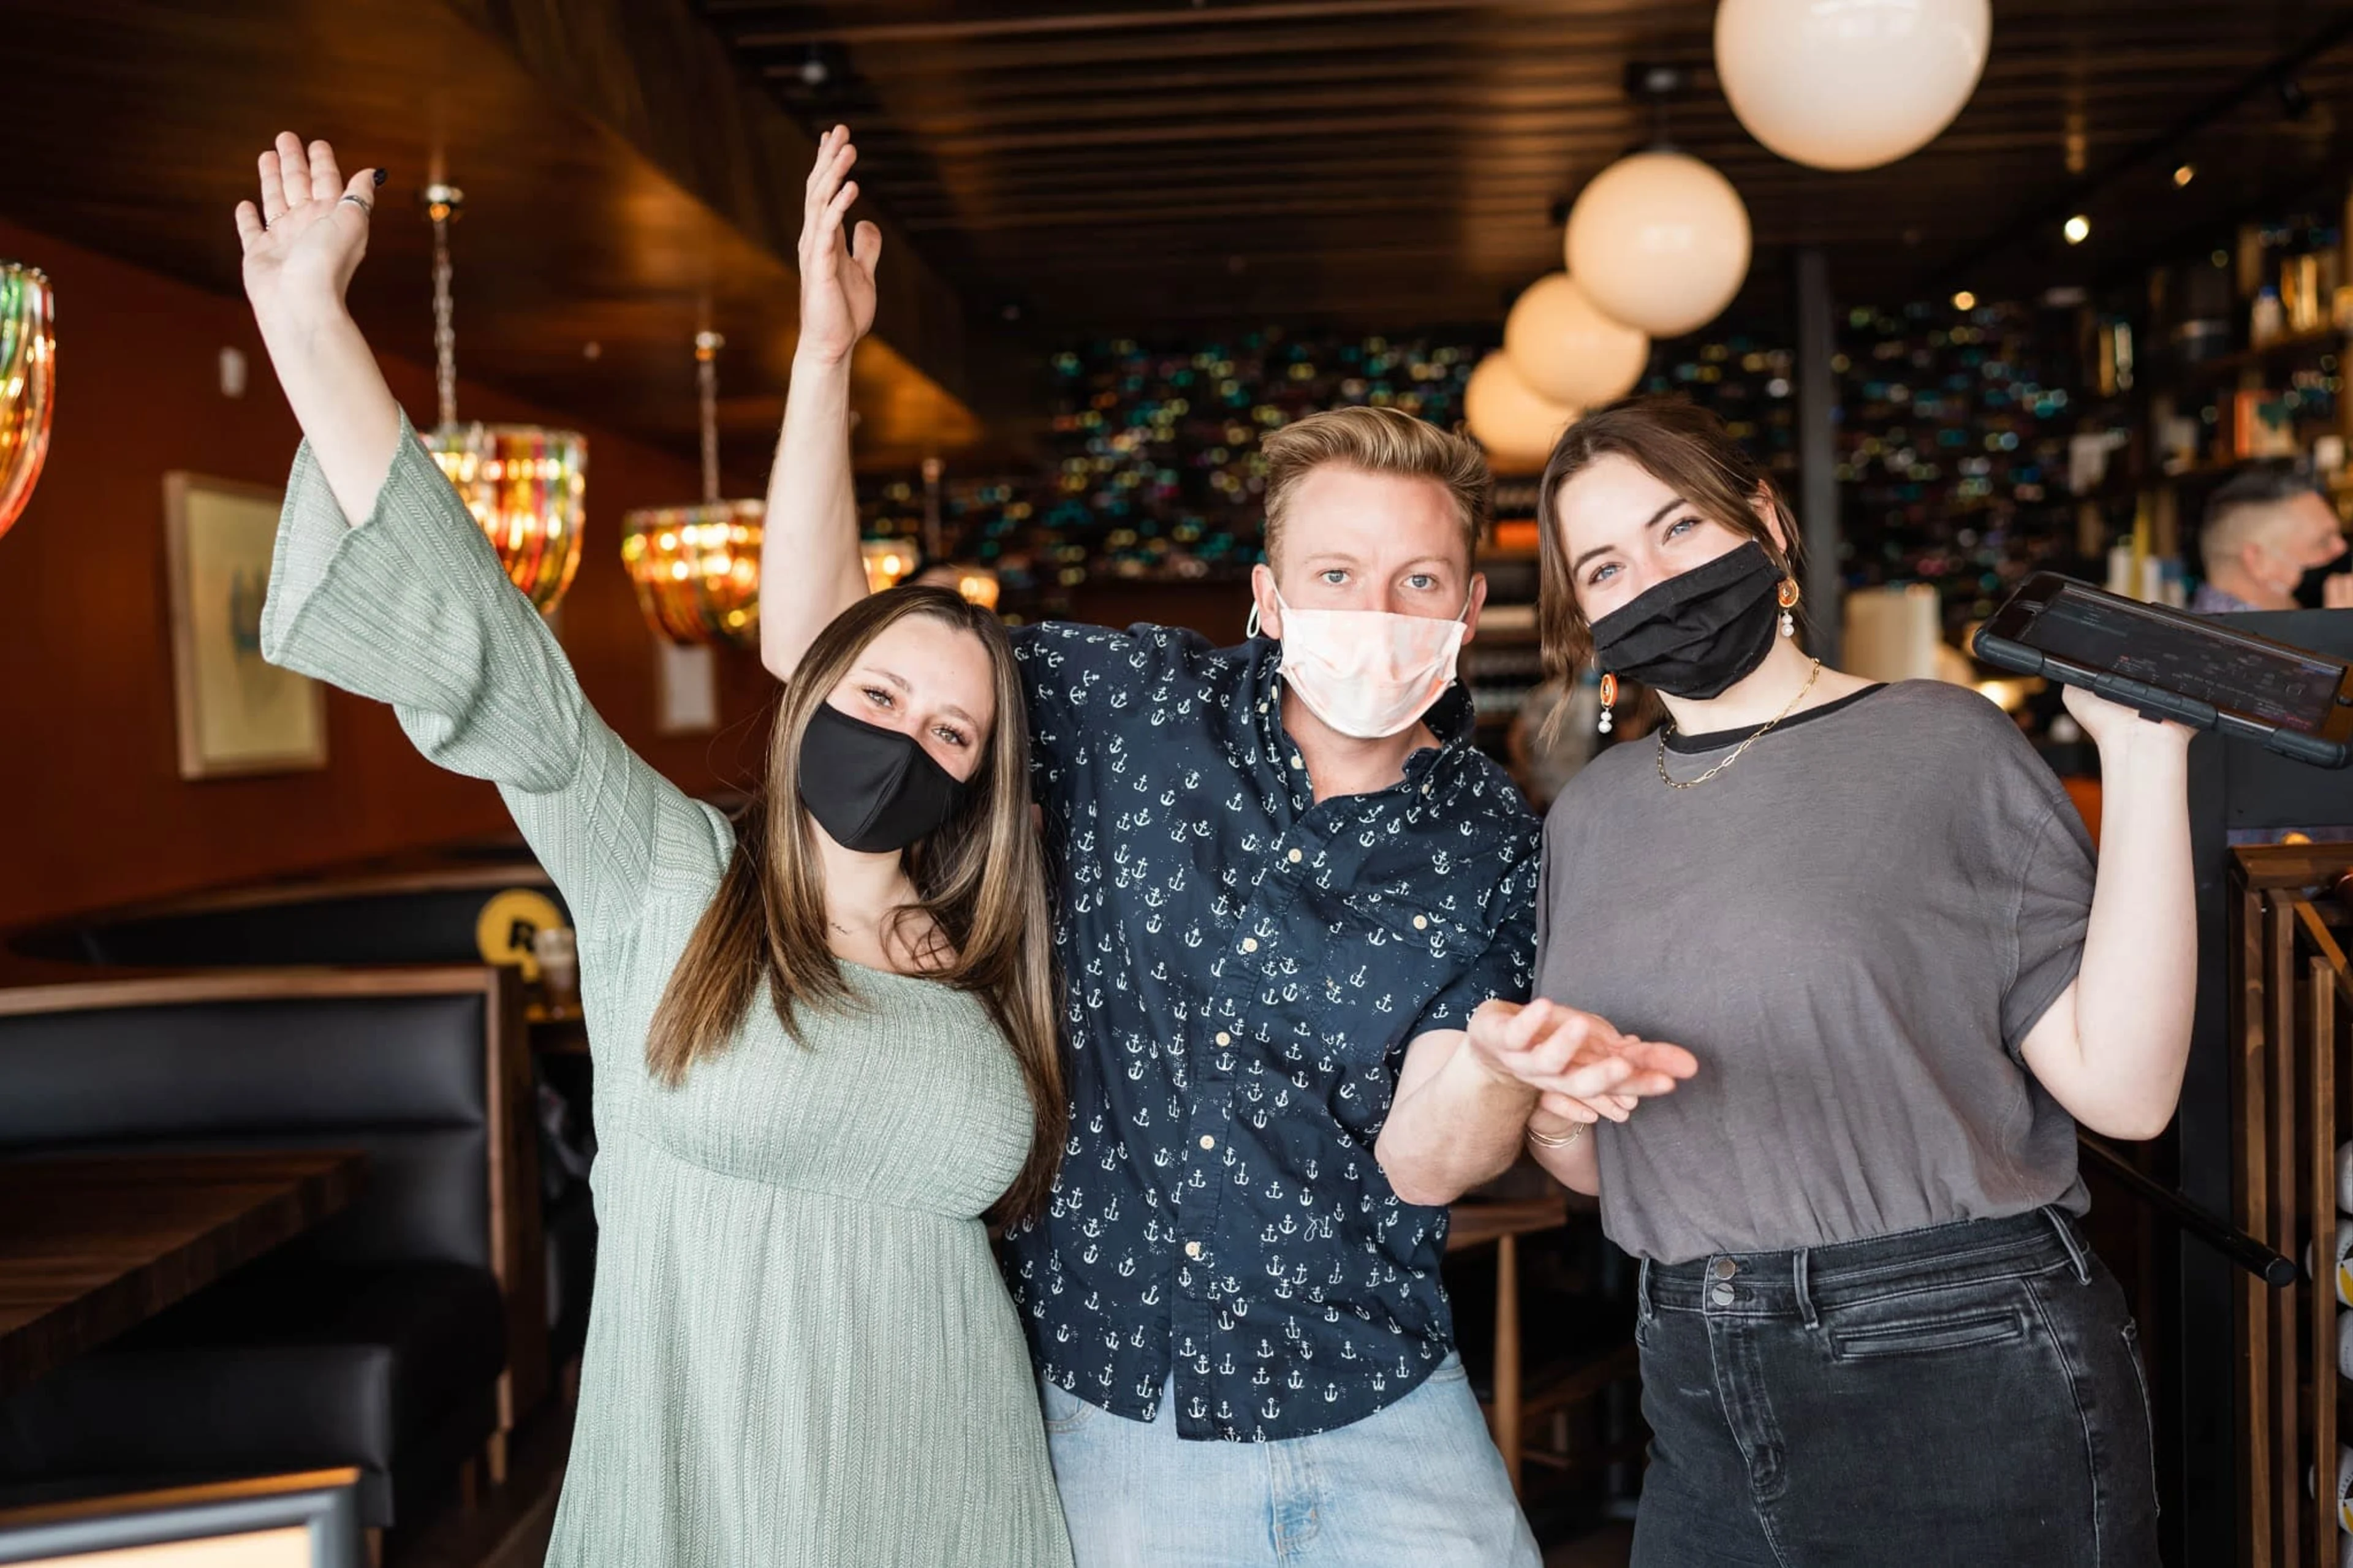 Three people wearing masks pose together with arms up